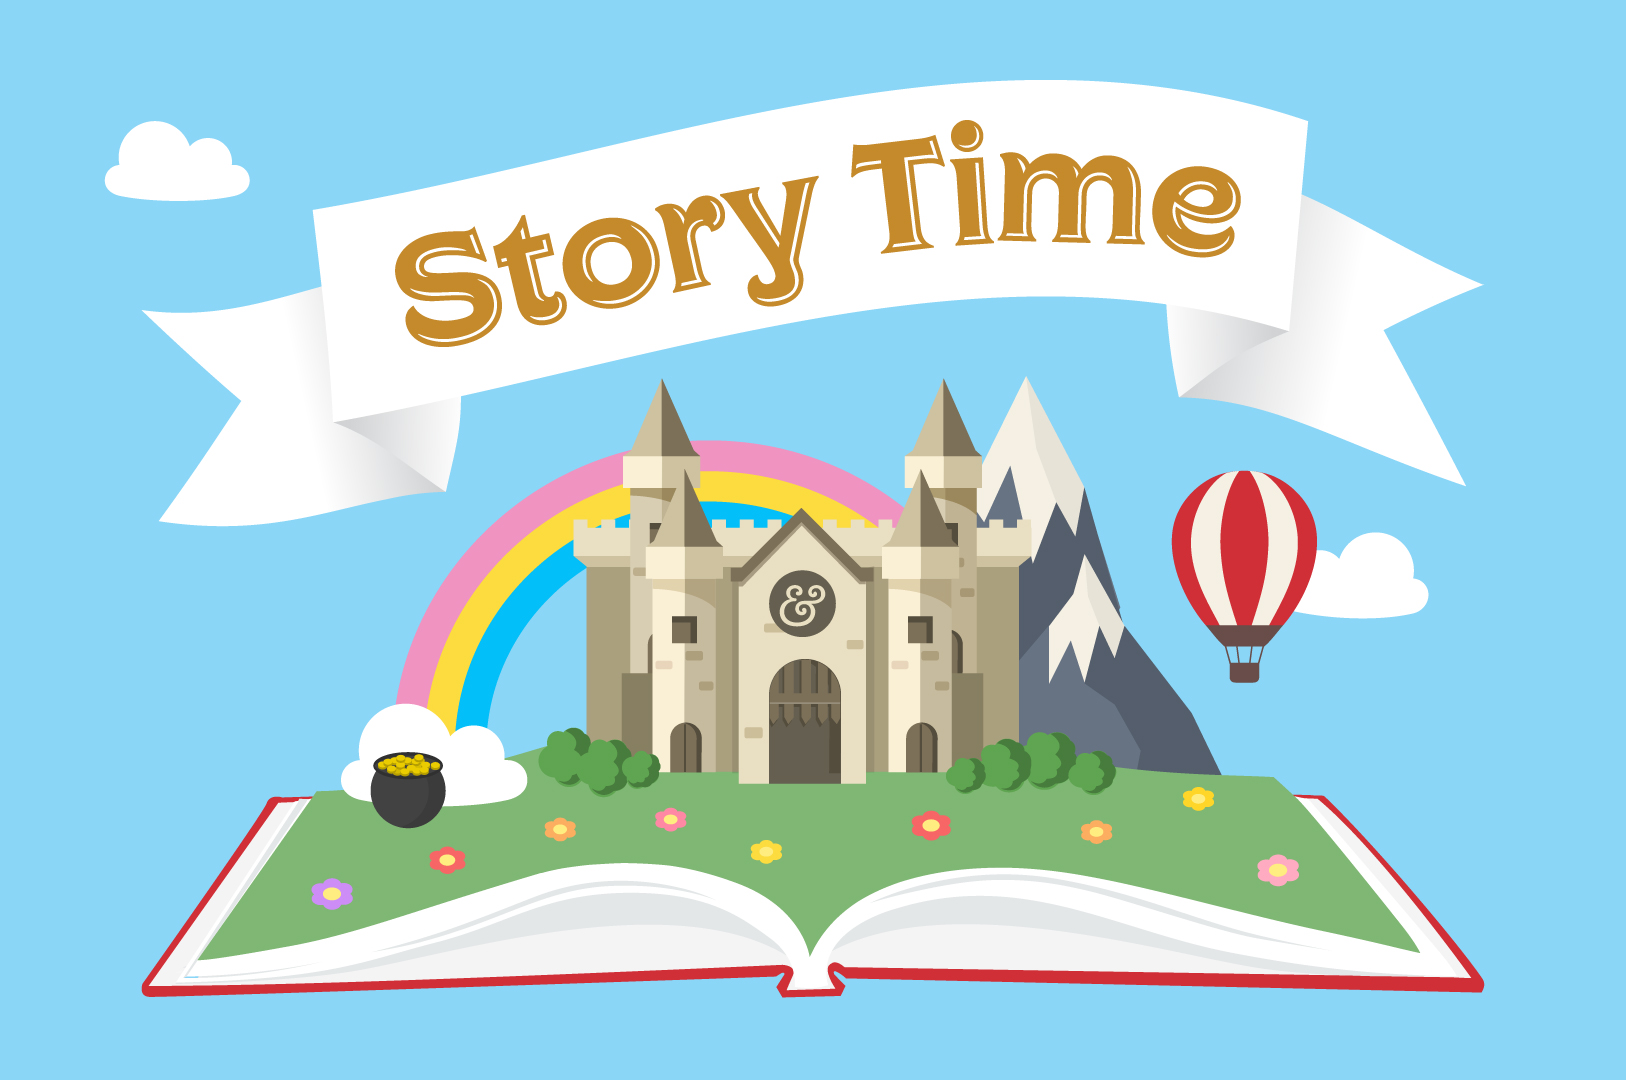 An illustration of an open book with a castle, hot air balloon, and rainbow coming out of its pages.